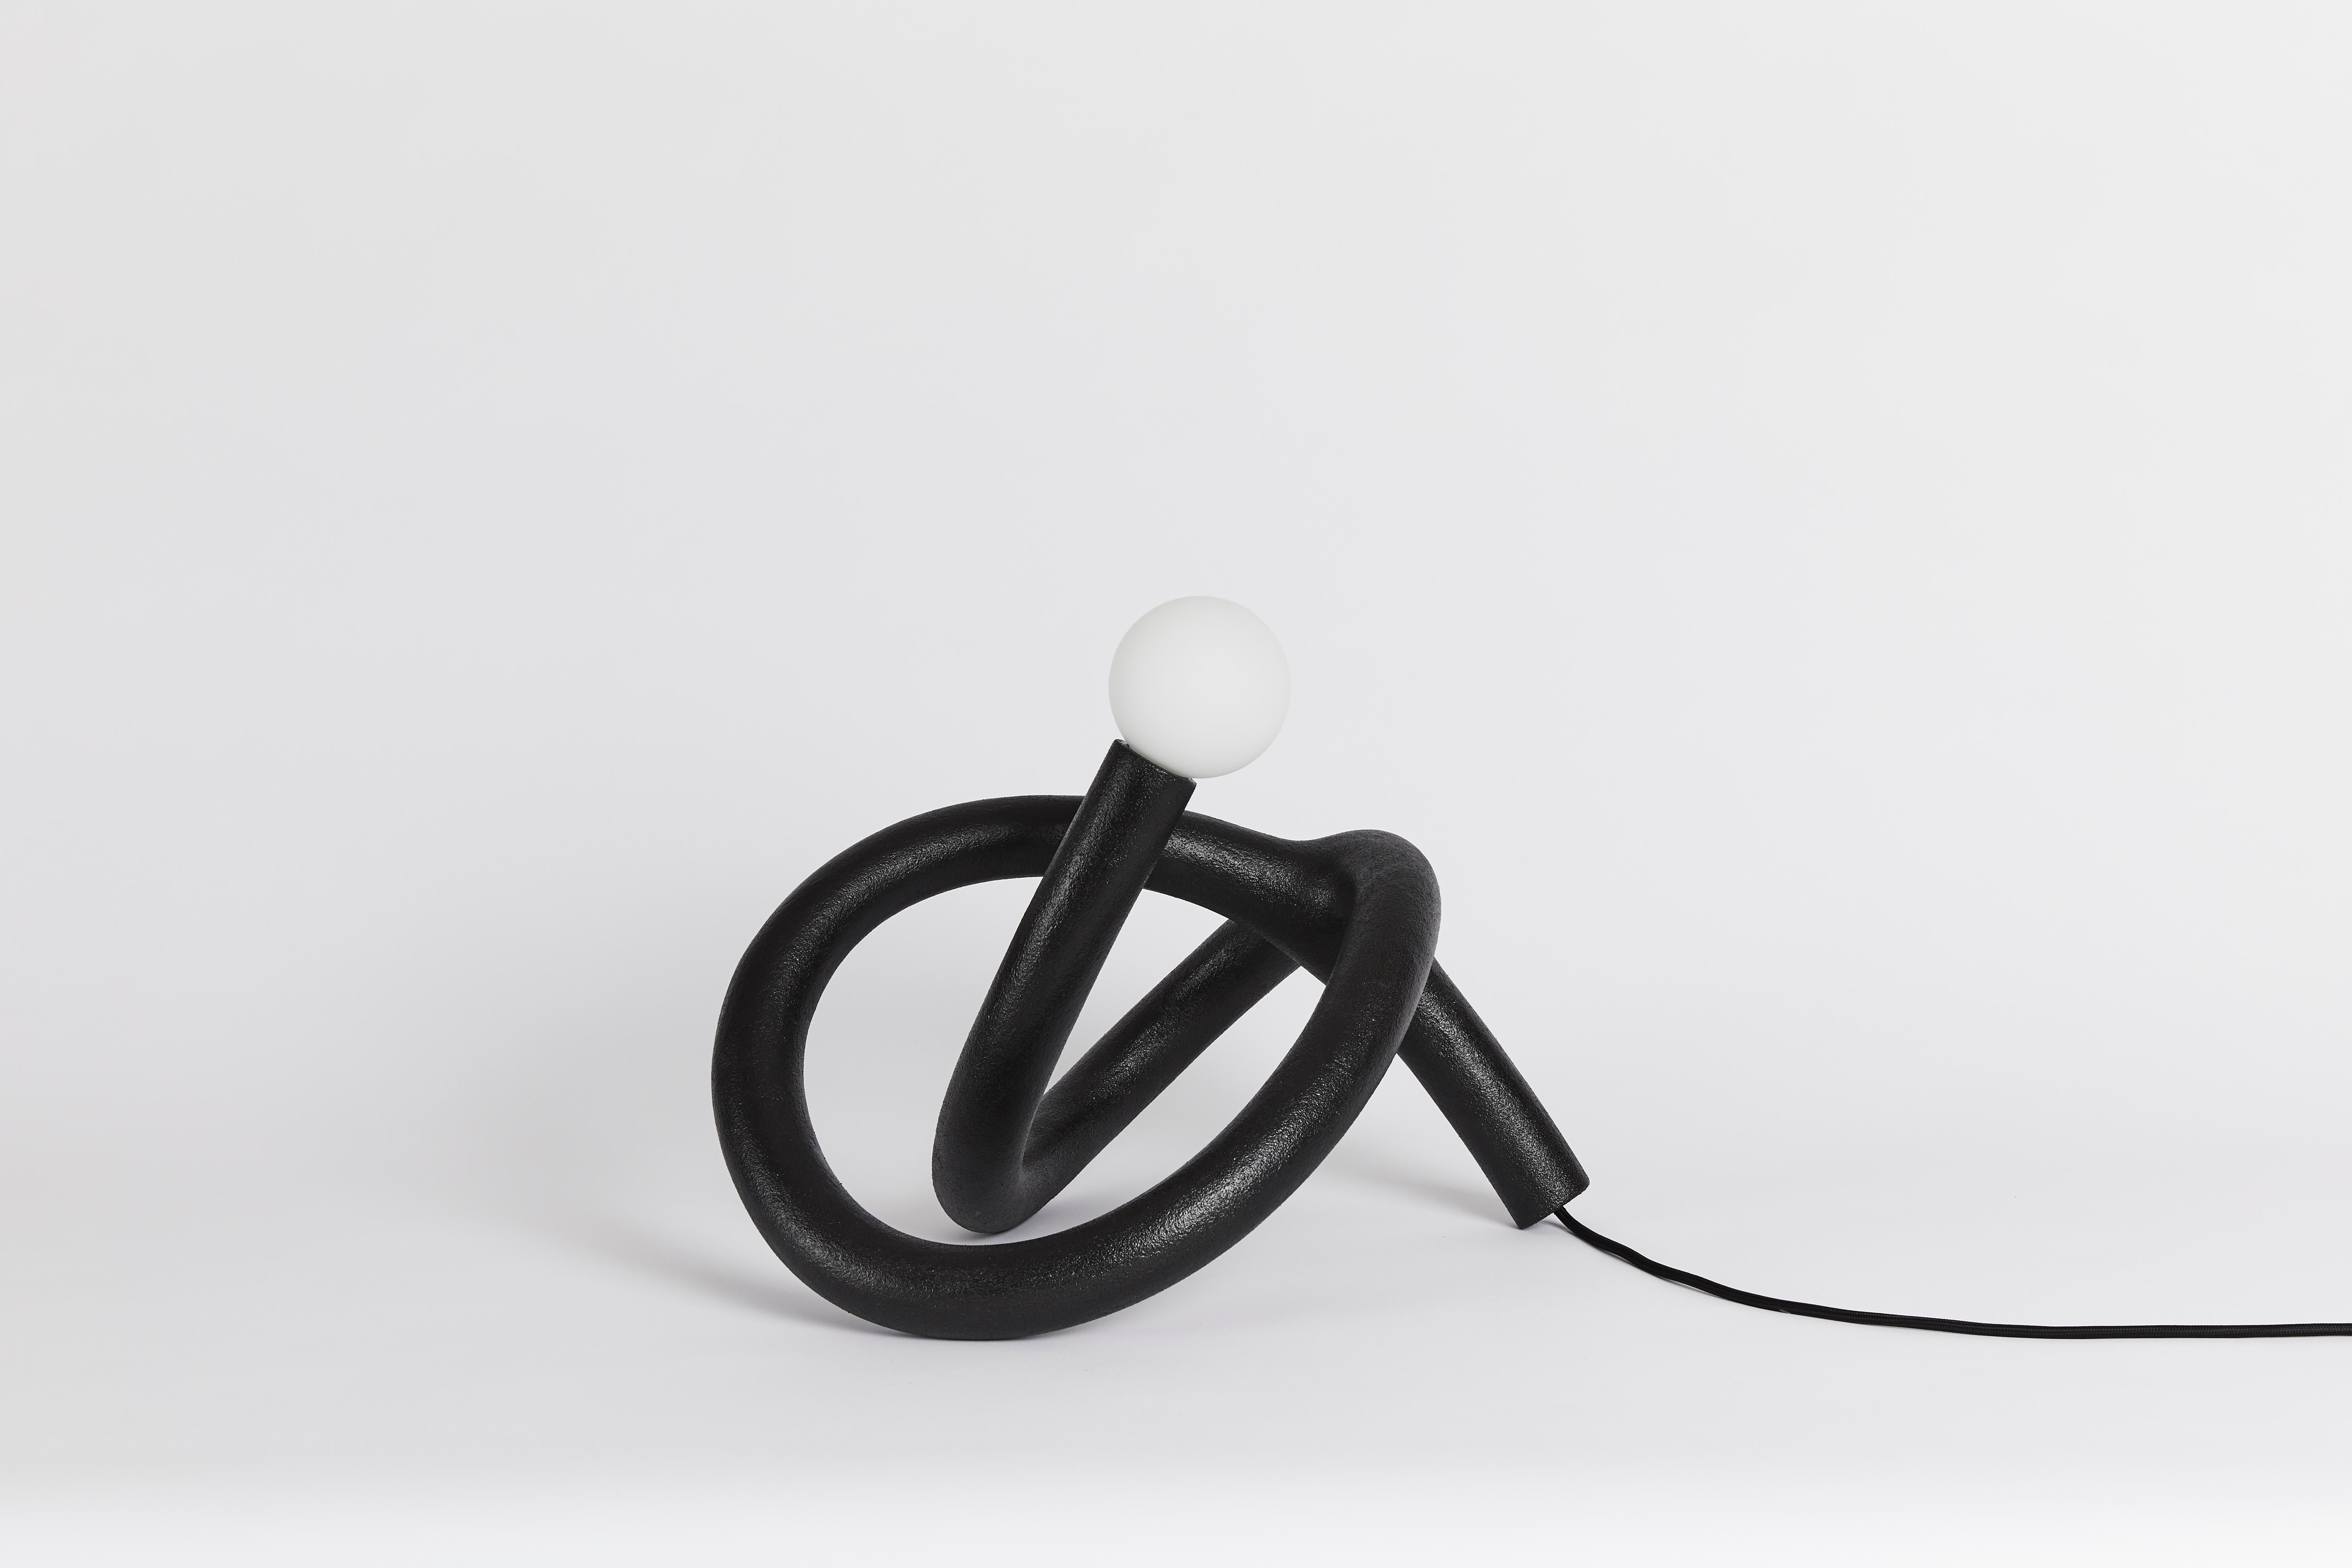 Random desk light by Hot Wire Extensions
Limited edition
Materials: Waste SLS 3D nylon powder, sand from sustainable sources
Dimensions: W 33 x L 47 x H 34 cm 
Colour: Anthracite
Also available in: Lemon, cream, aqua, grey, pink

All our lamps can